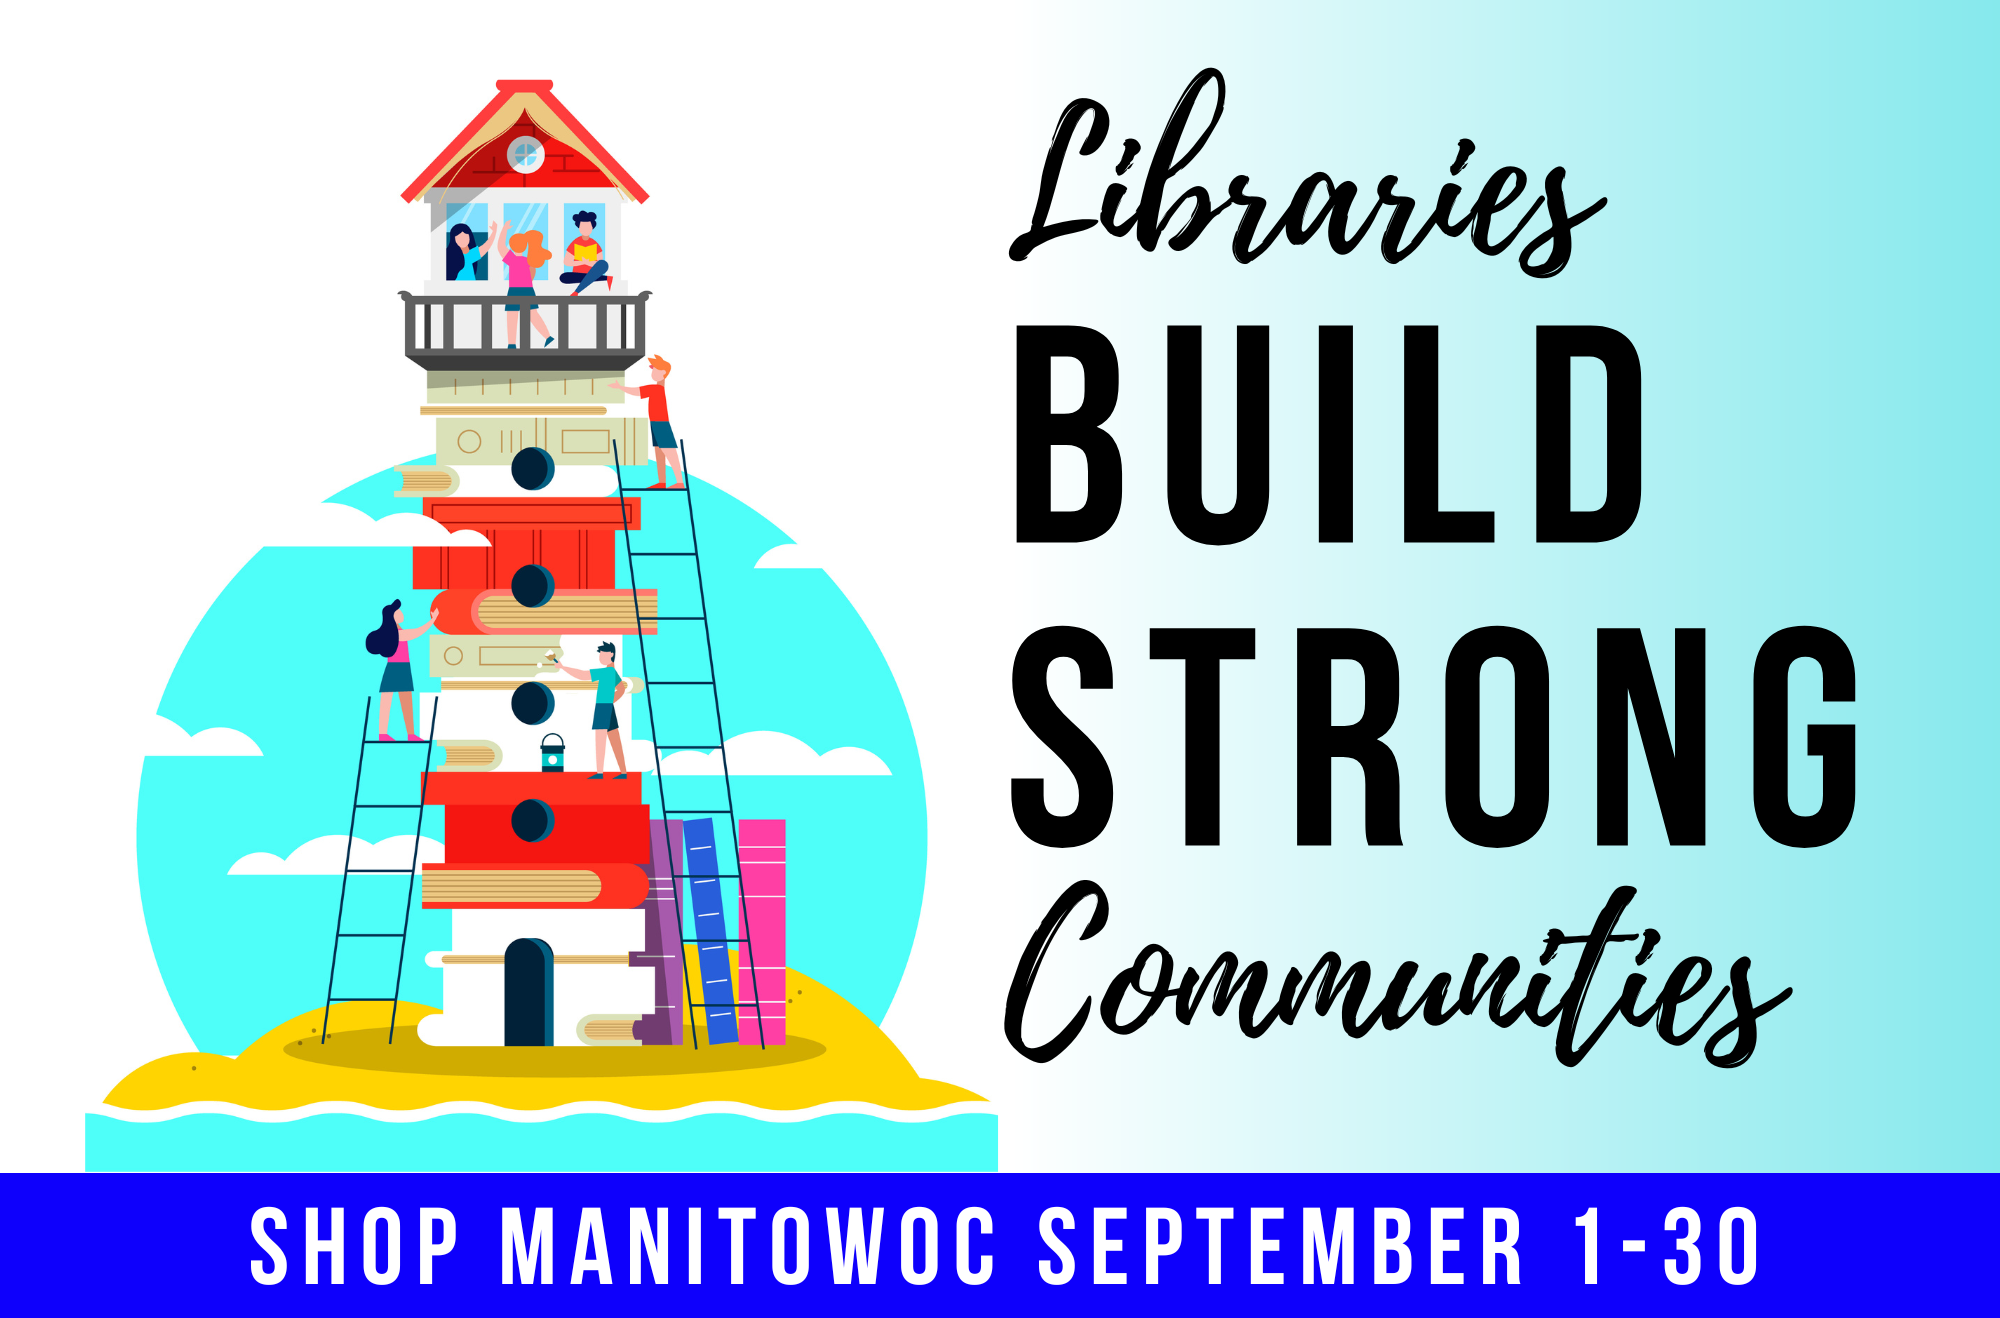 Libraries Build Strong Communities